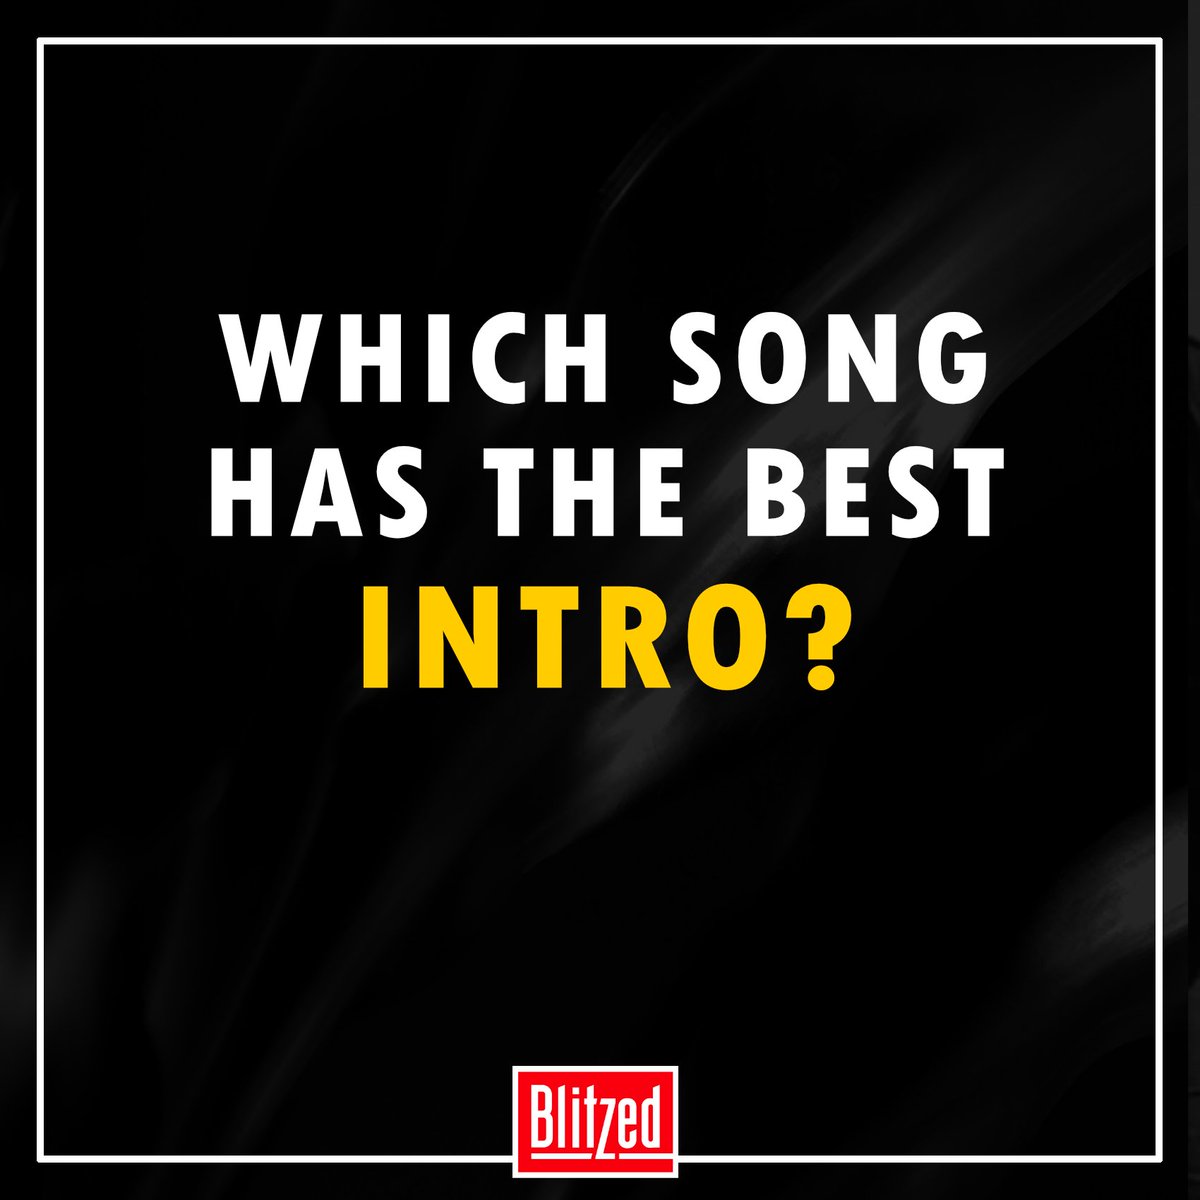 The mark of many classic songs relies on how they start, so which of your favourite songs has that amazing, unforgettable intro?